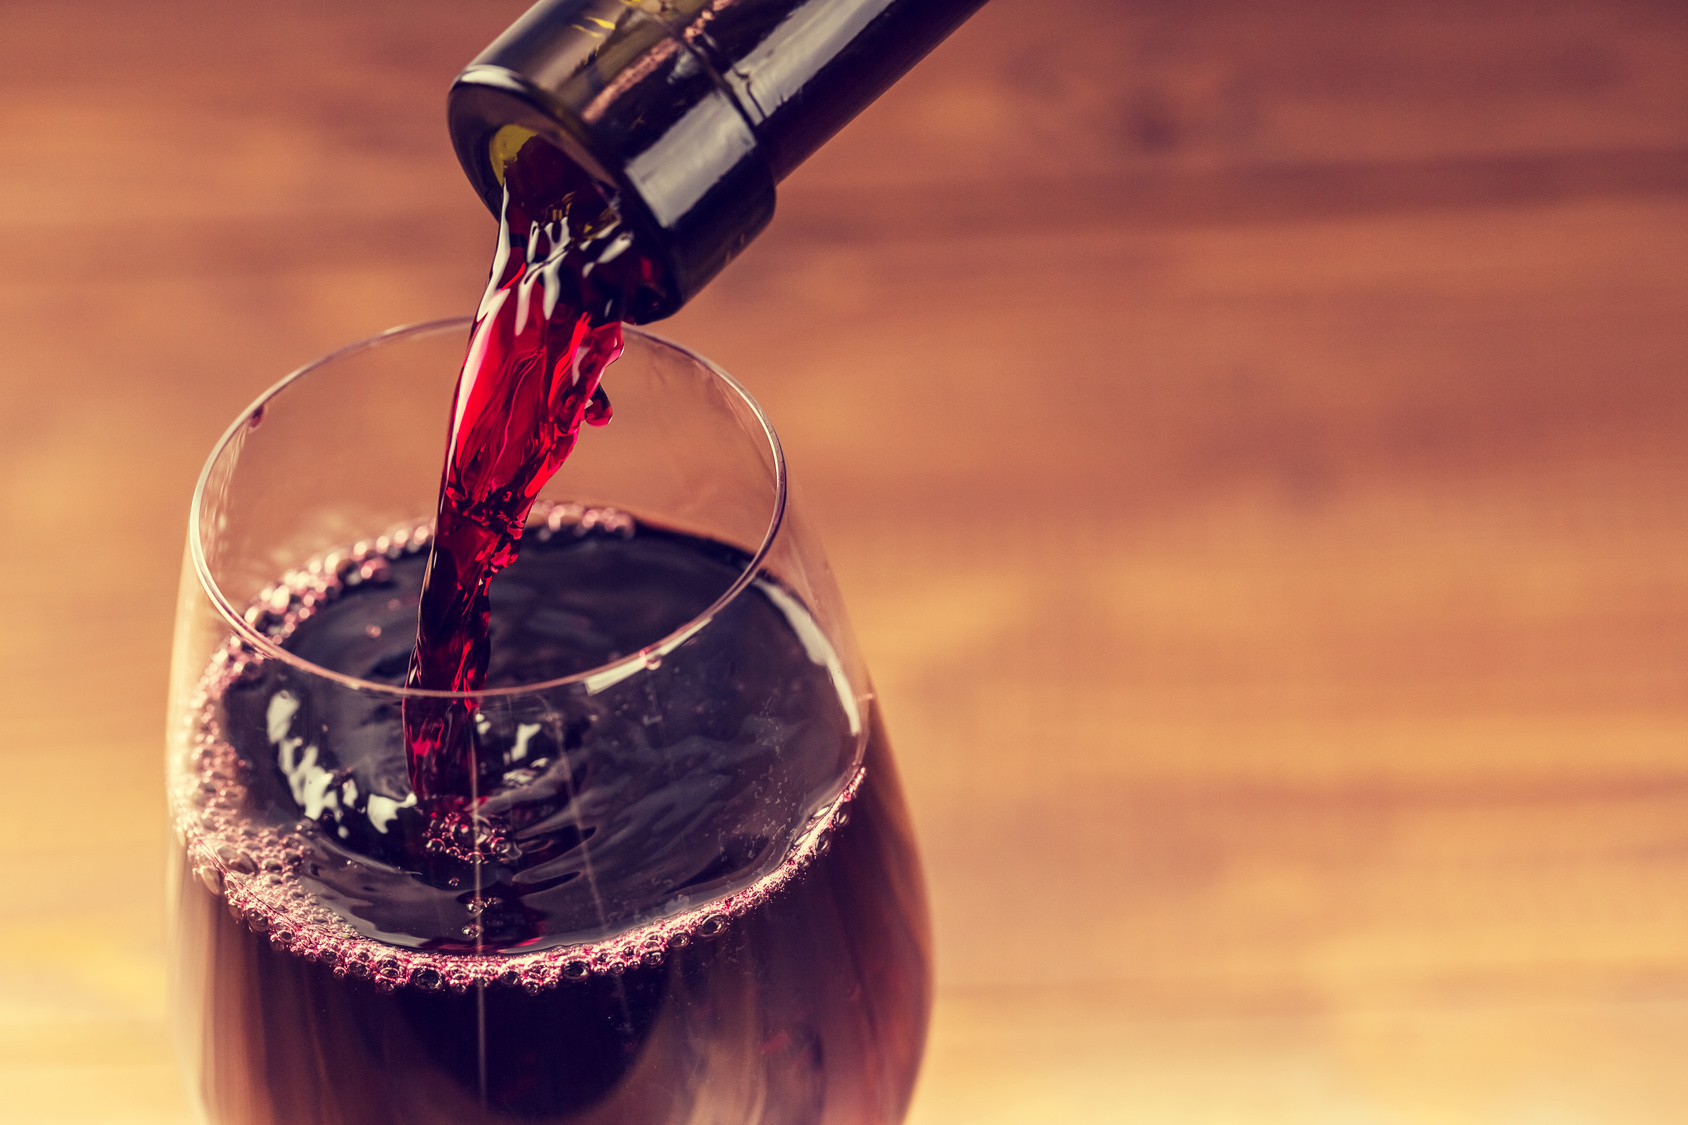 Pouring red wine into the glass against wooden background alcohol